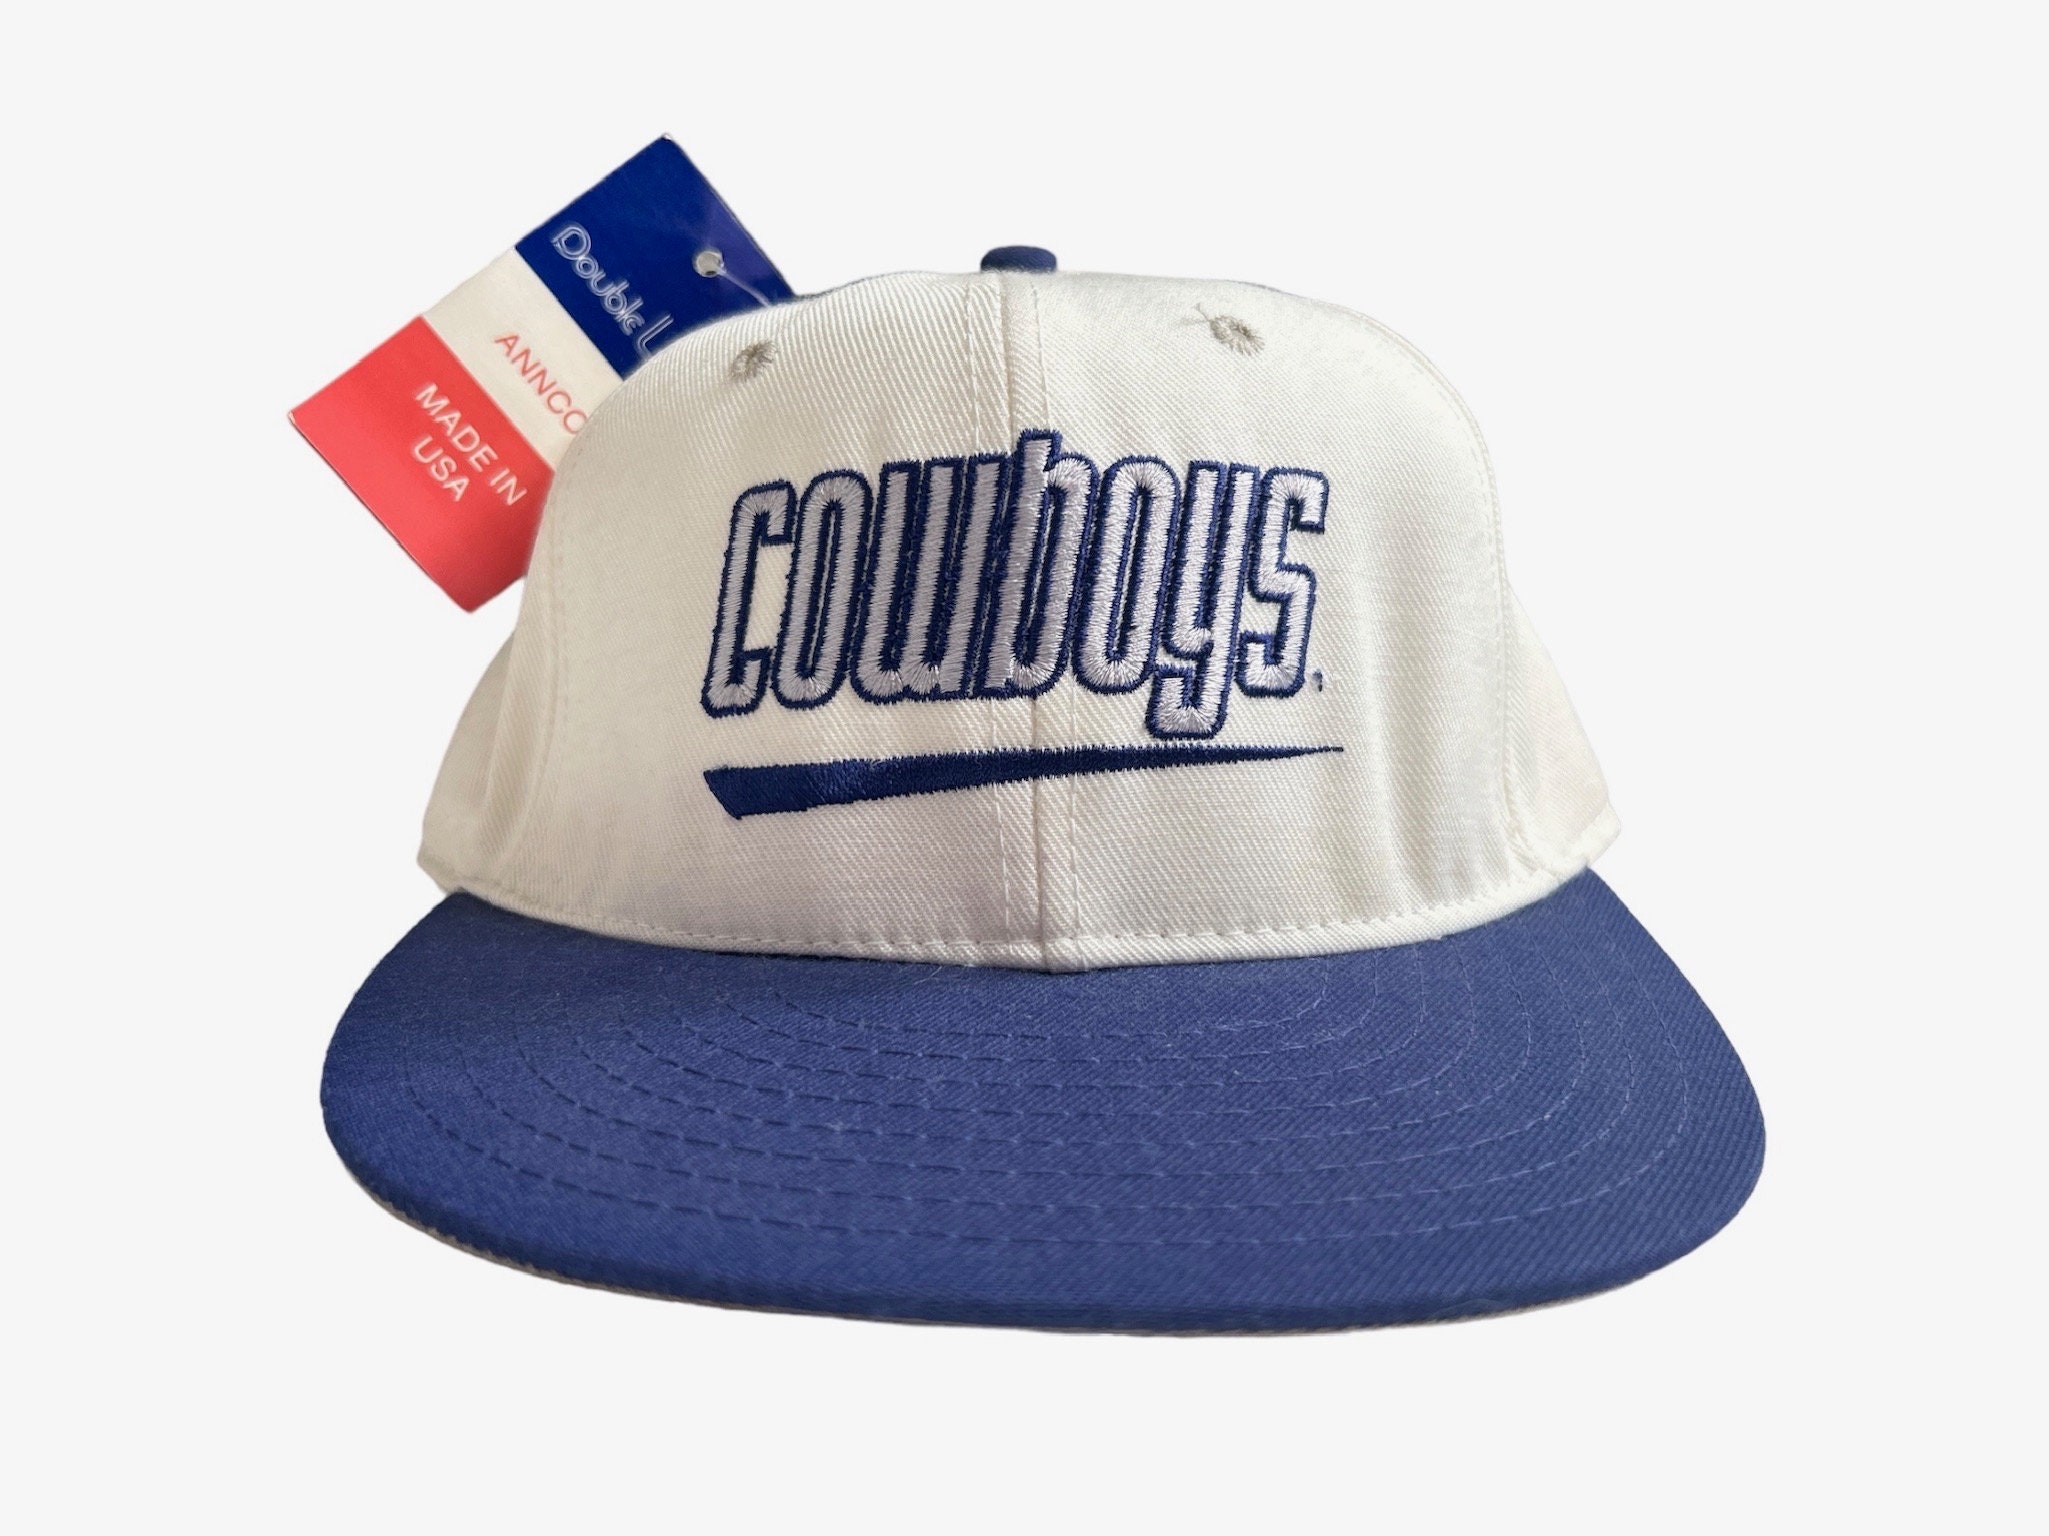 Vintage Starter (The Classic) - Dallas Cowboys Tri Power Embroidered Snapback Hat 1990s OSFA